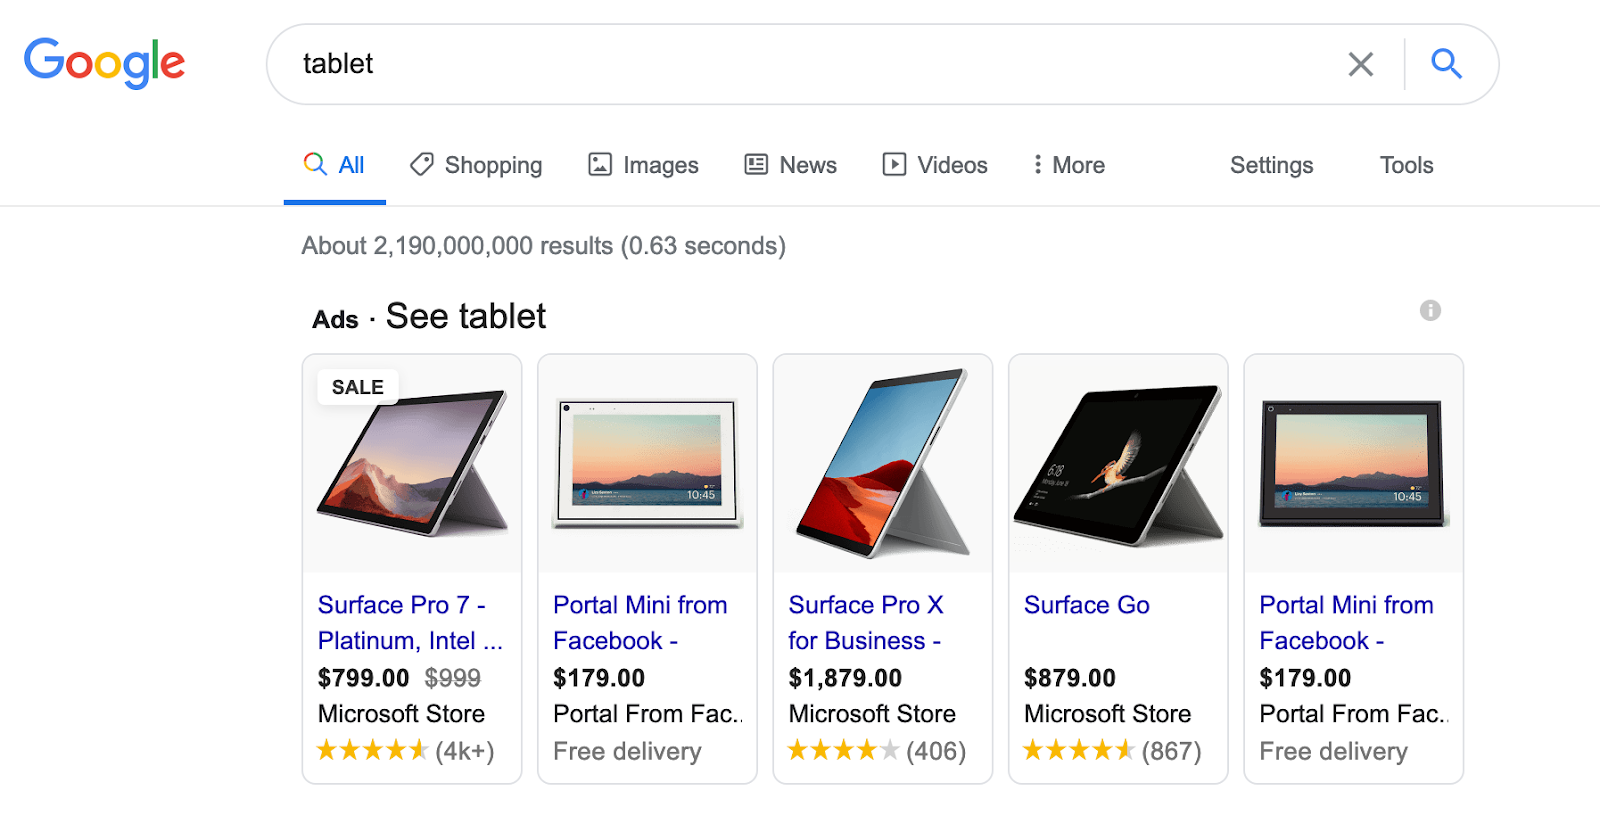 Tablet Google search results.